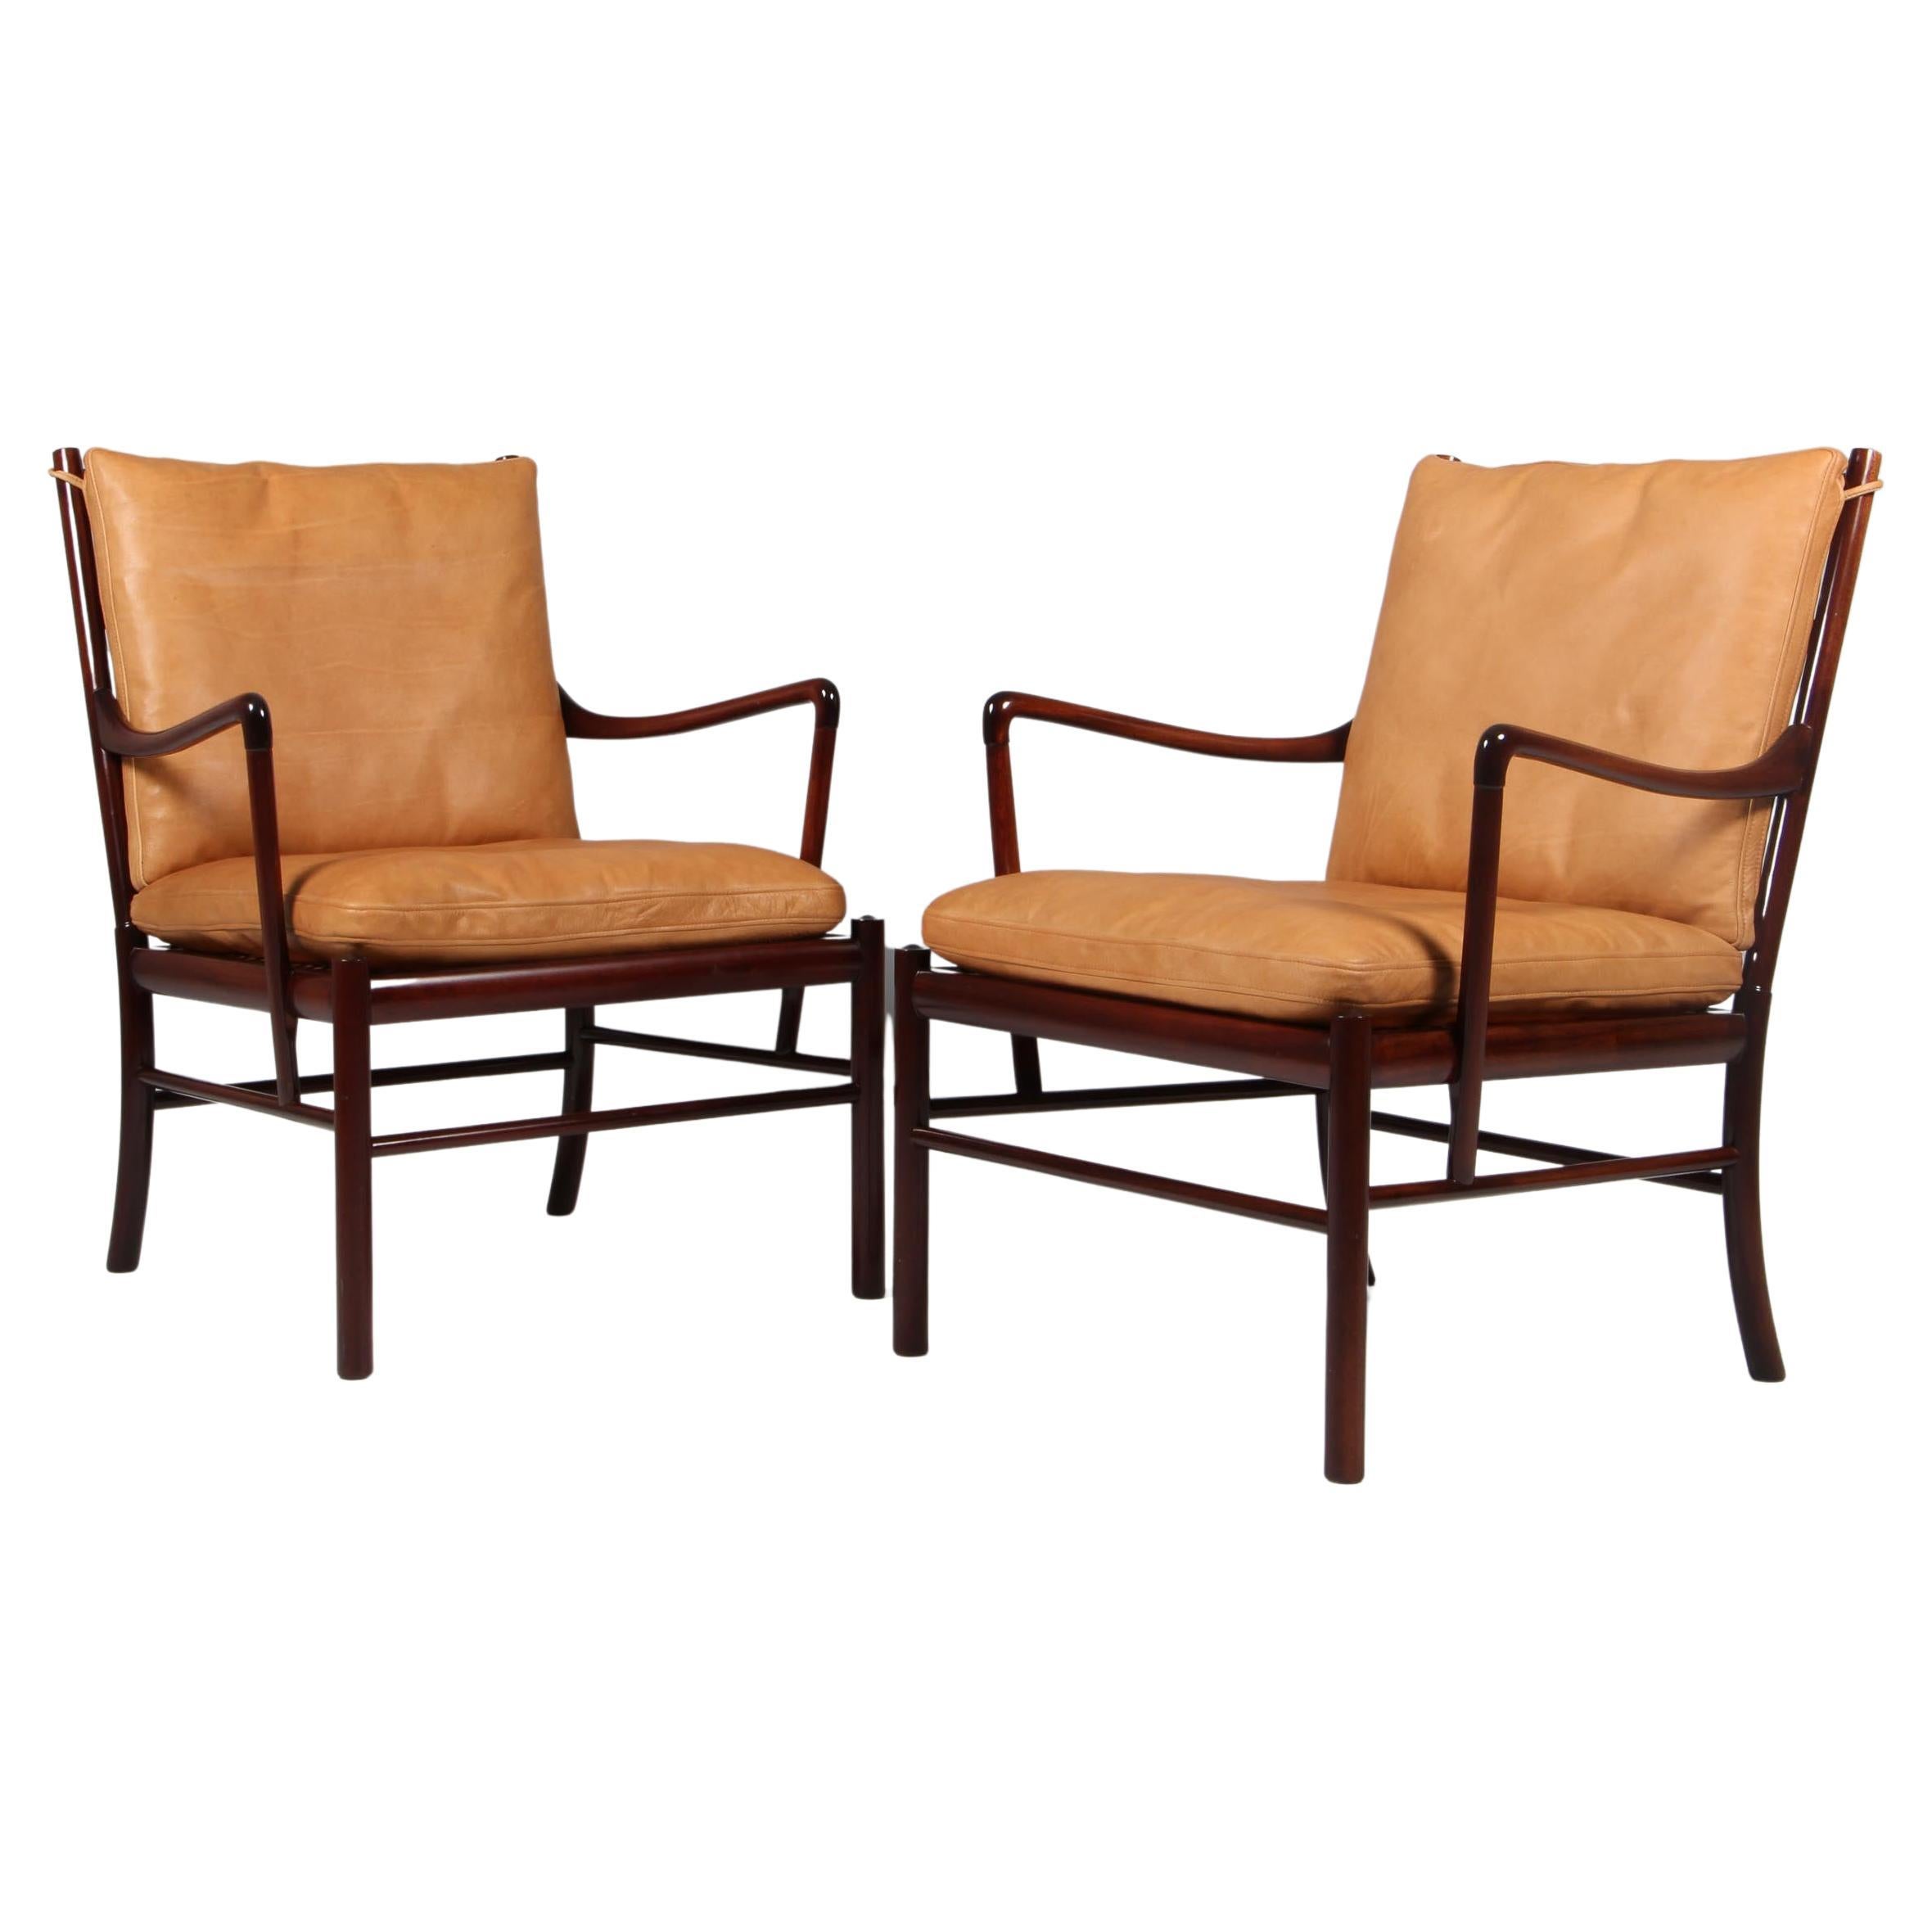 Ole Wanscher Colonial Chairs